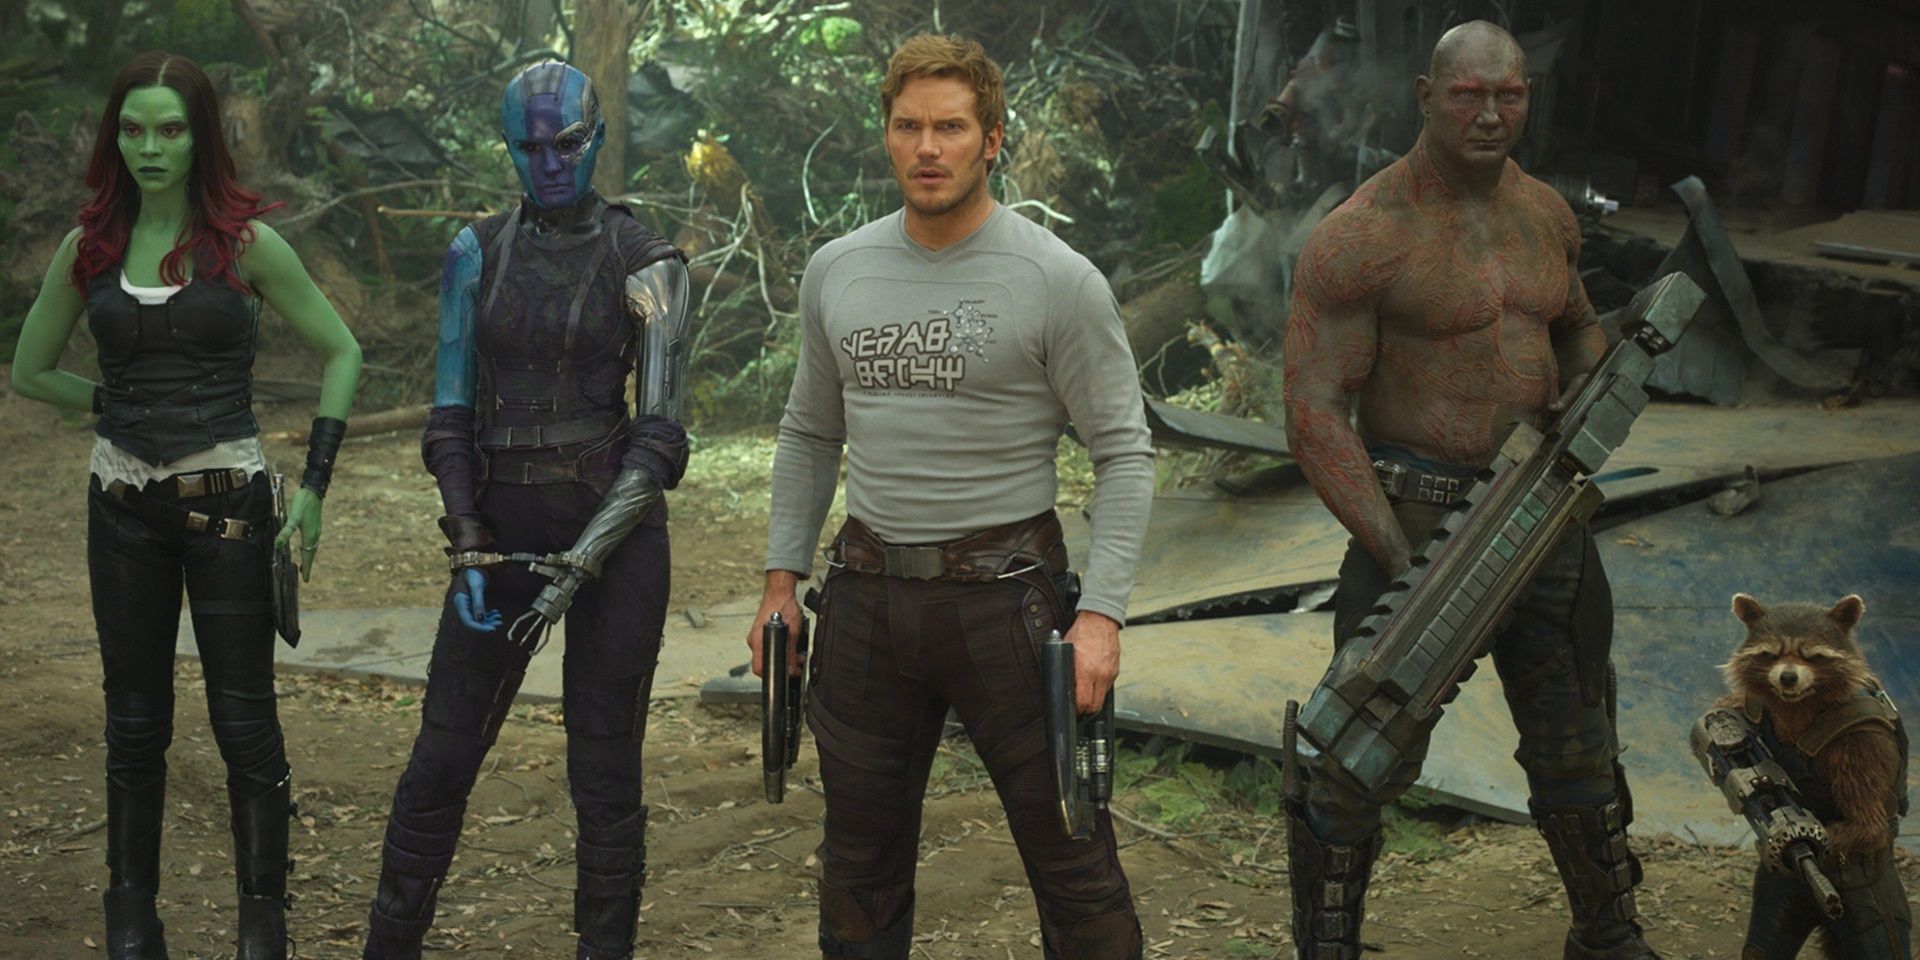 Gamora_Nebula_Quill_Drax_and_Rocket_in_Guardians_of_the_Galaxy_Vol_2